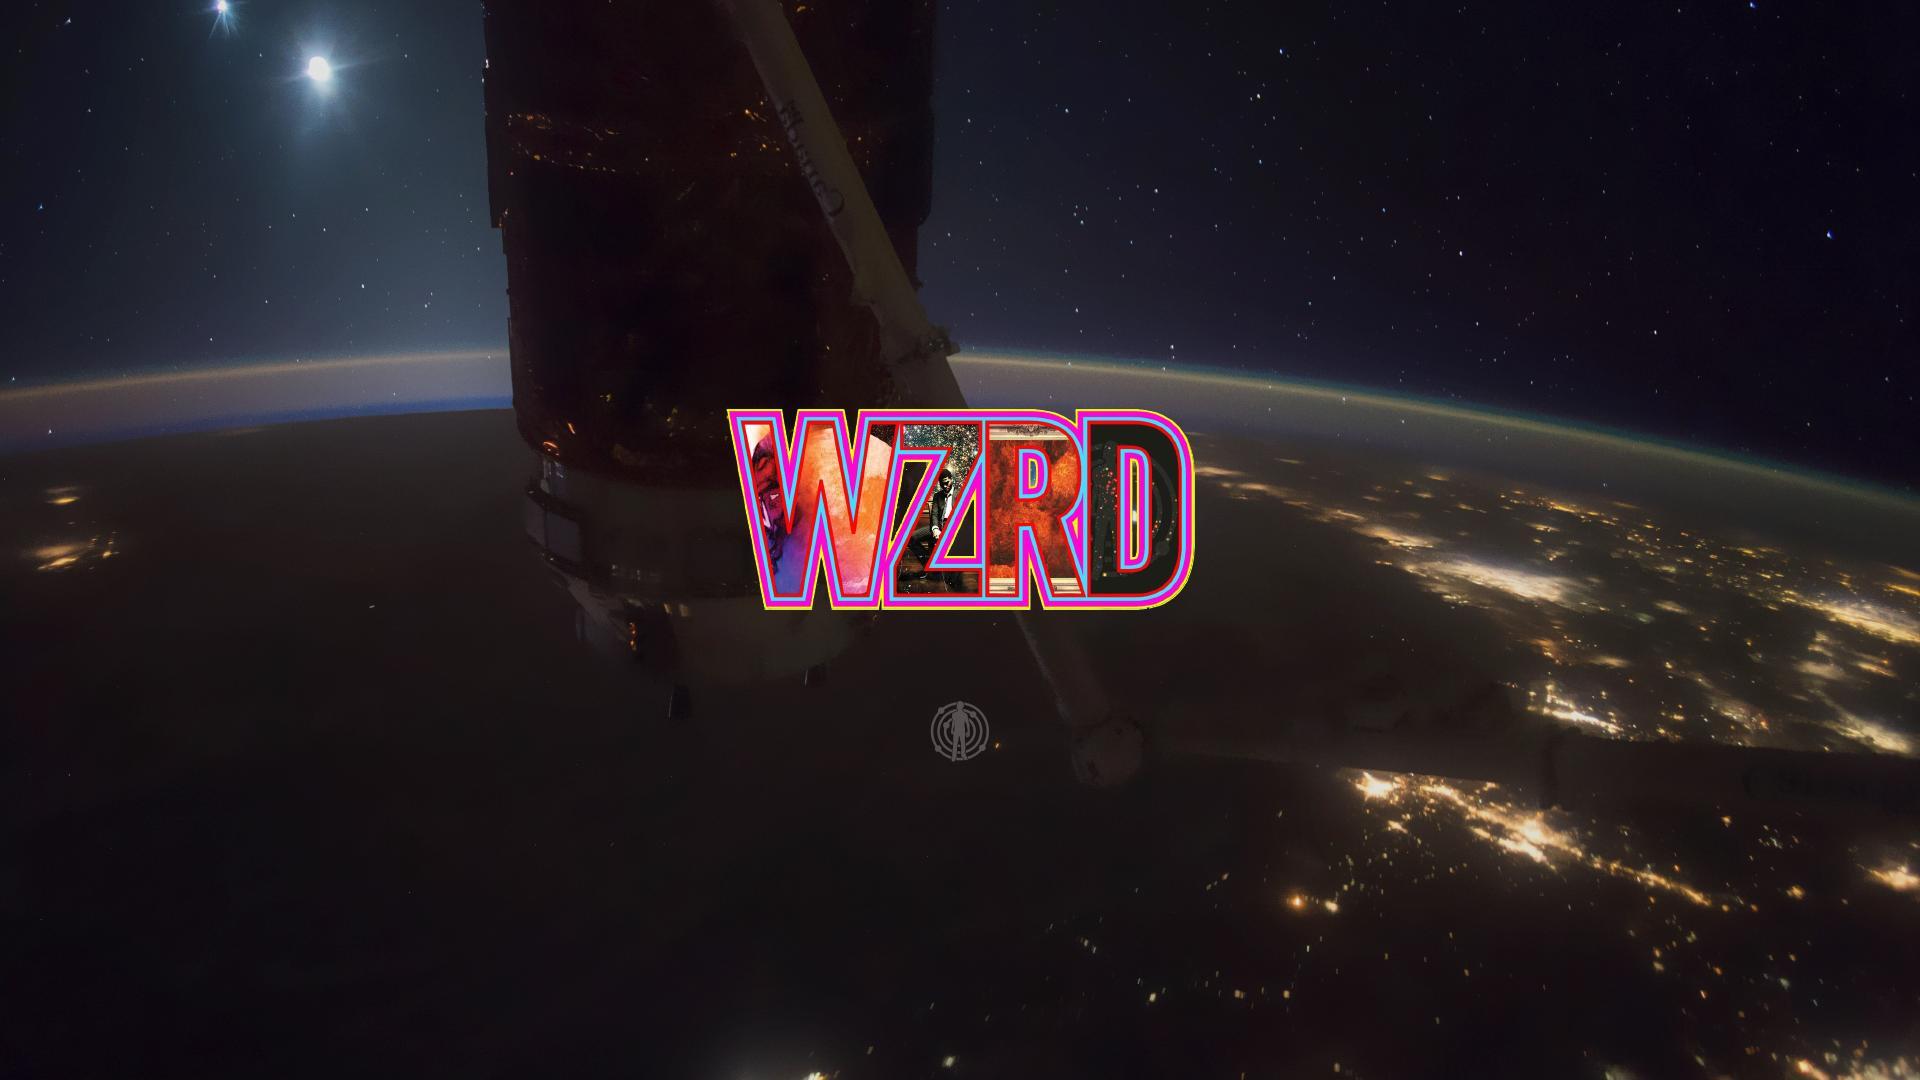 Cudi WZRD Space Wallpaper [Full Quality Link In Comments]